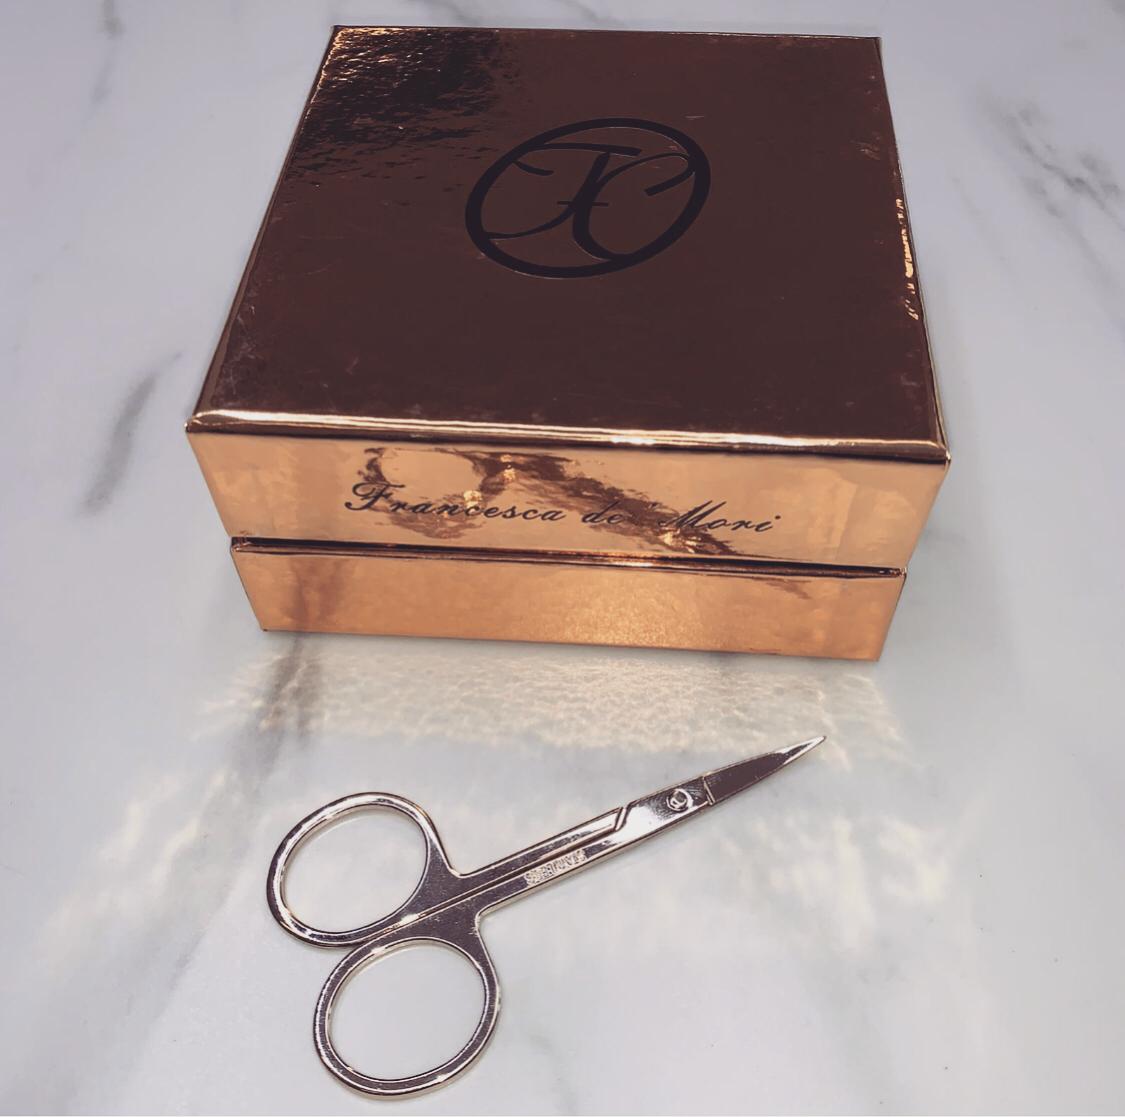 WIG LACE CUTTING SCISSORS - FREEDOMCOUTURE